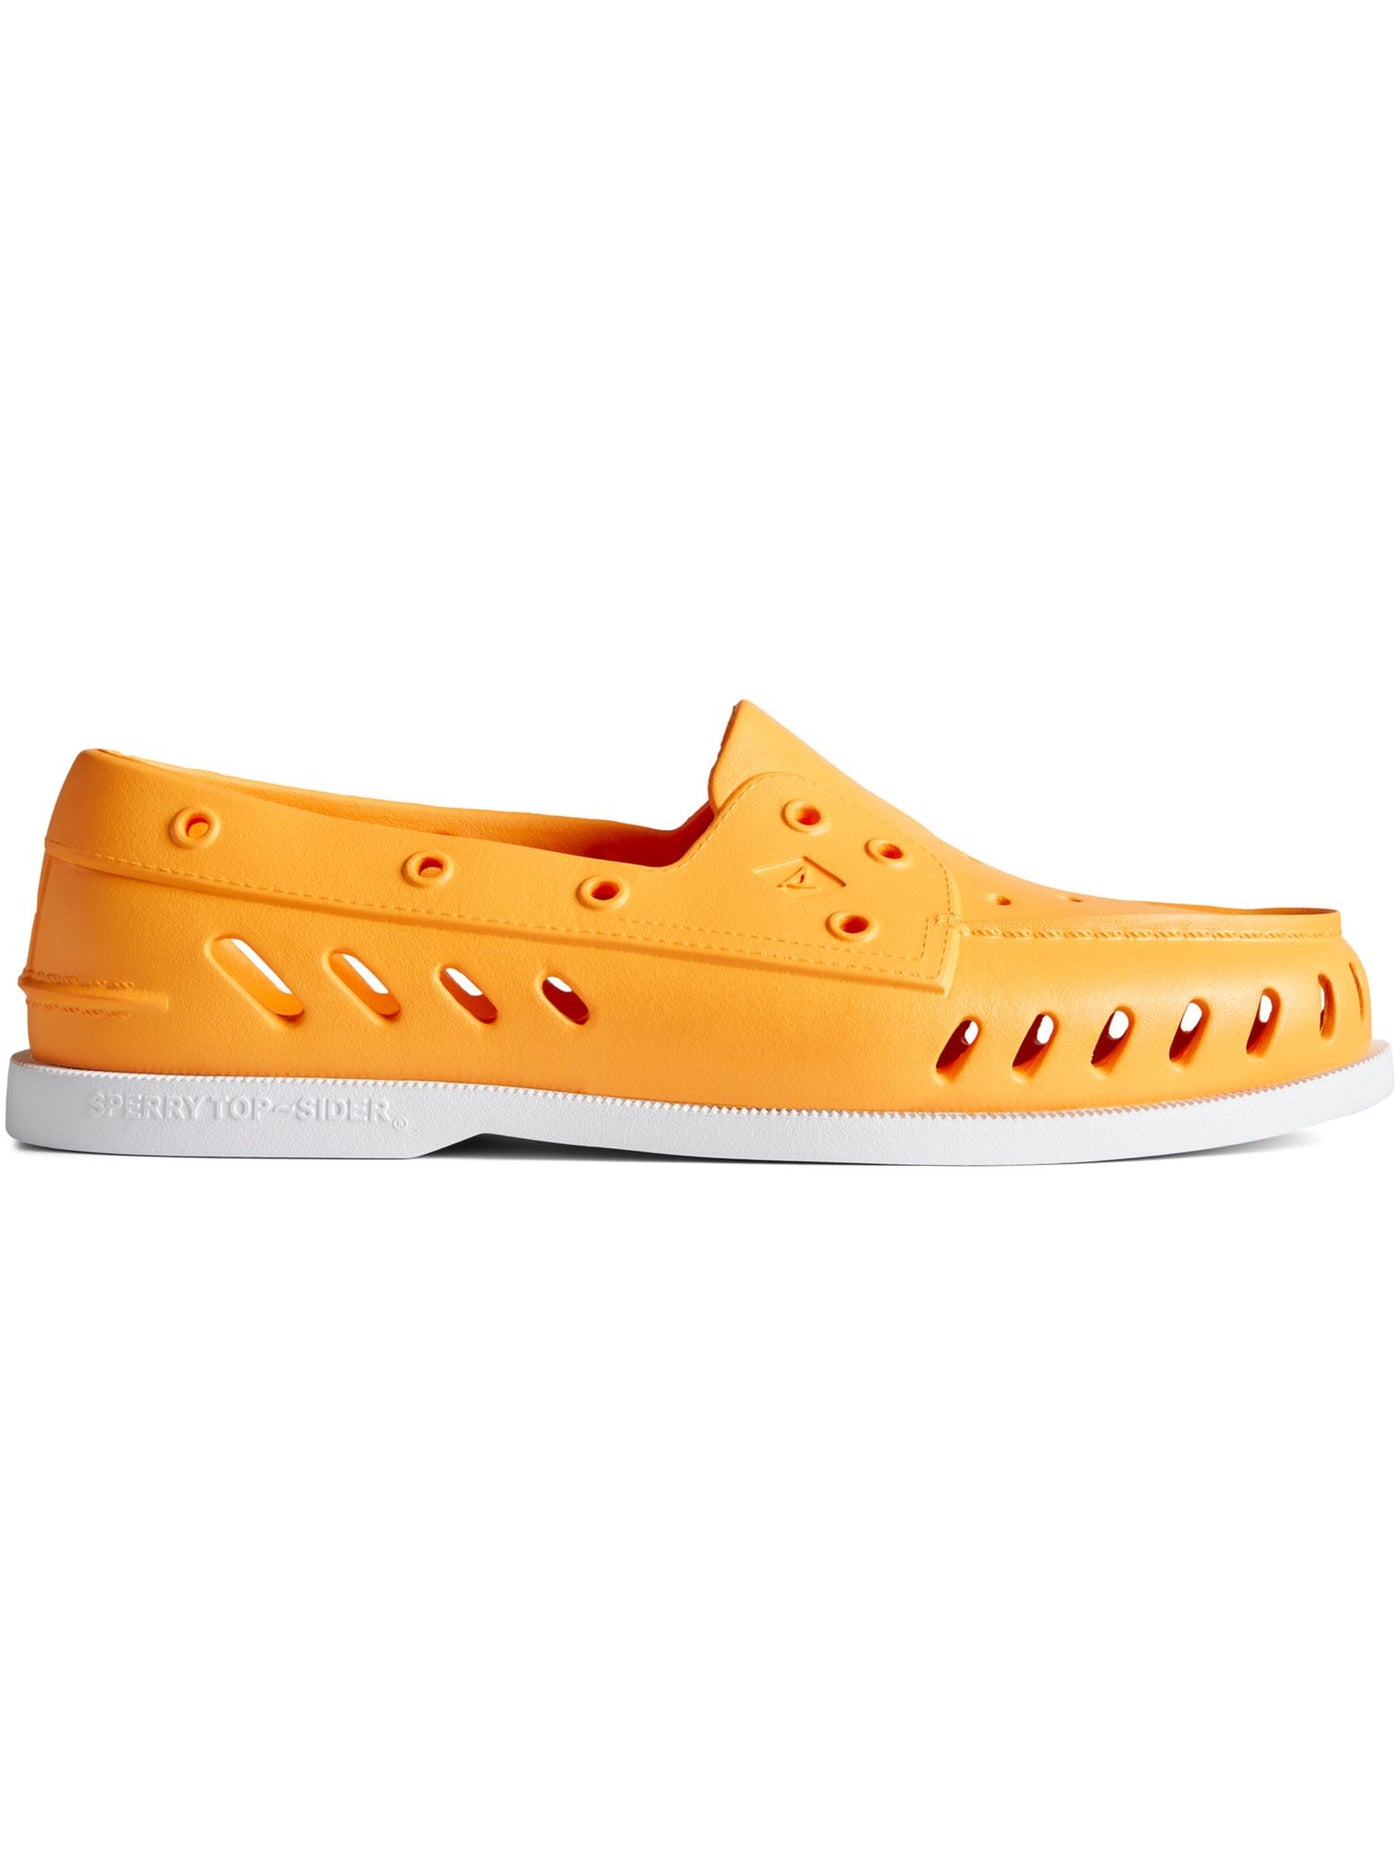 SPERRY Mens Yellow Buoyant Construction Moc-Toe Perforated Non-Marking A/o Almond Toe Slip On Loafers Shoes 9 M